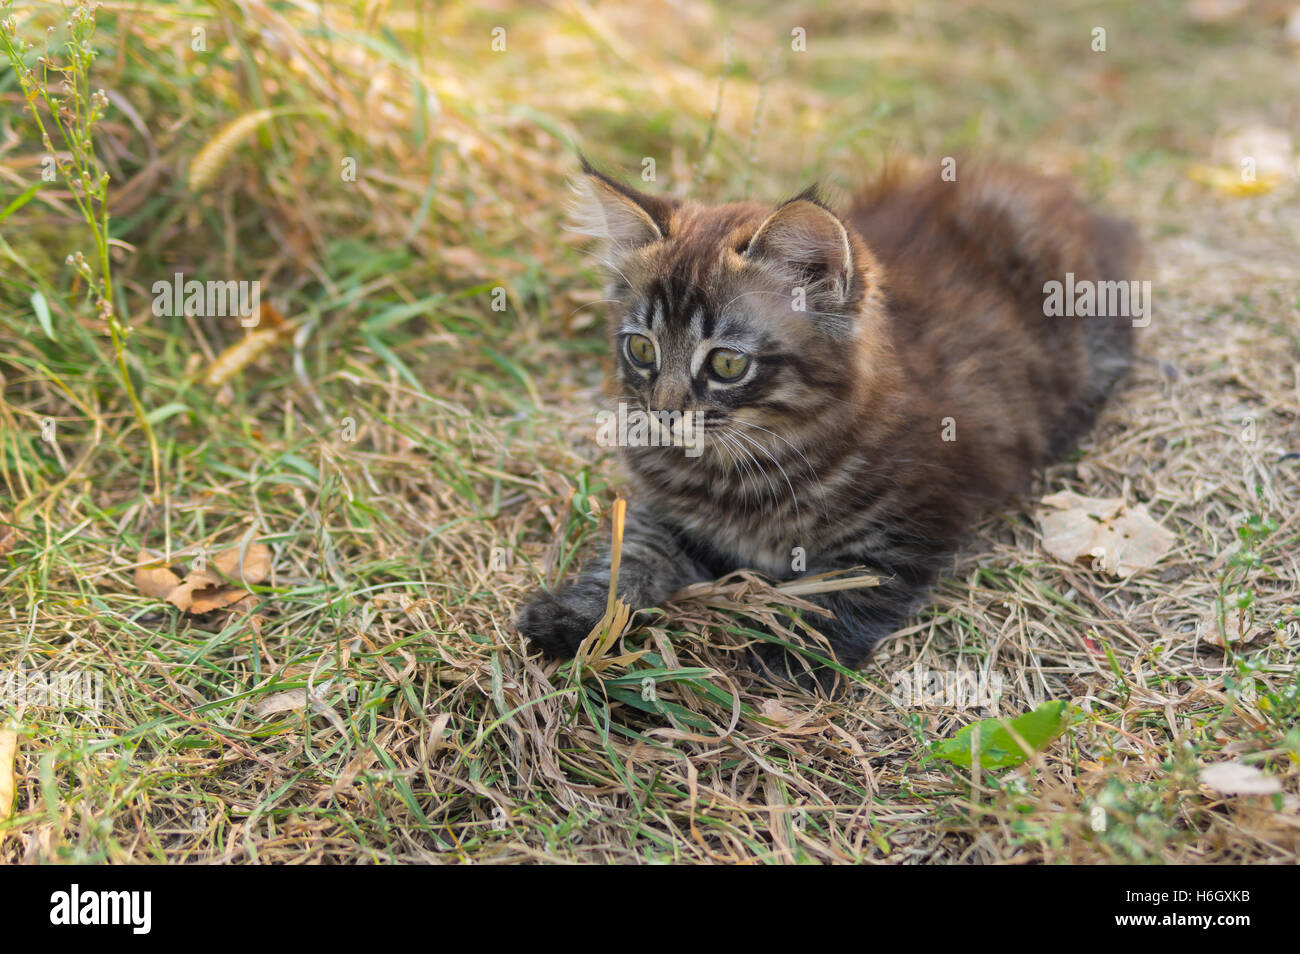 Tabby kitten looking with interest while playing outdoor Stock Photo